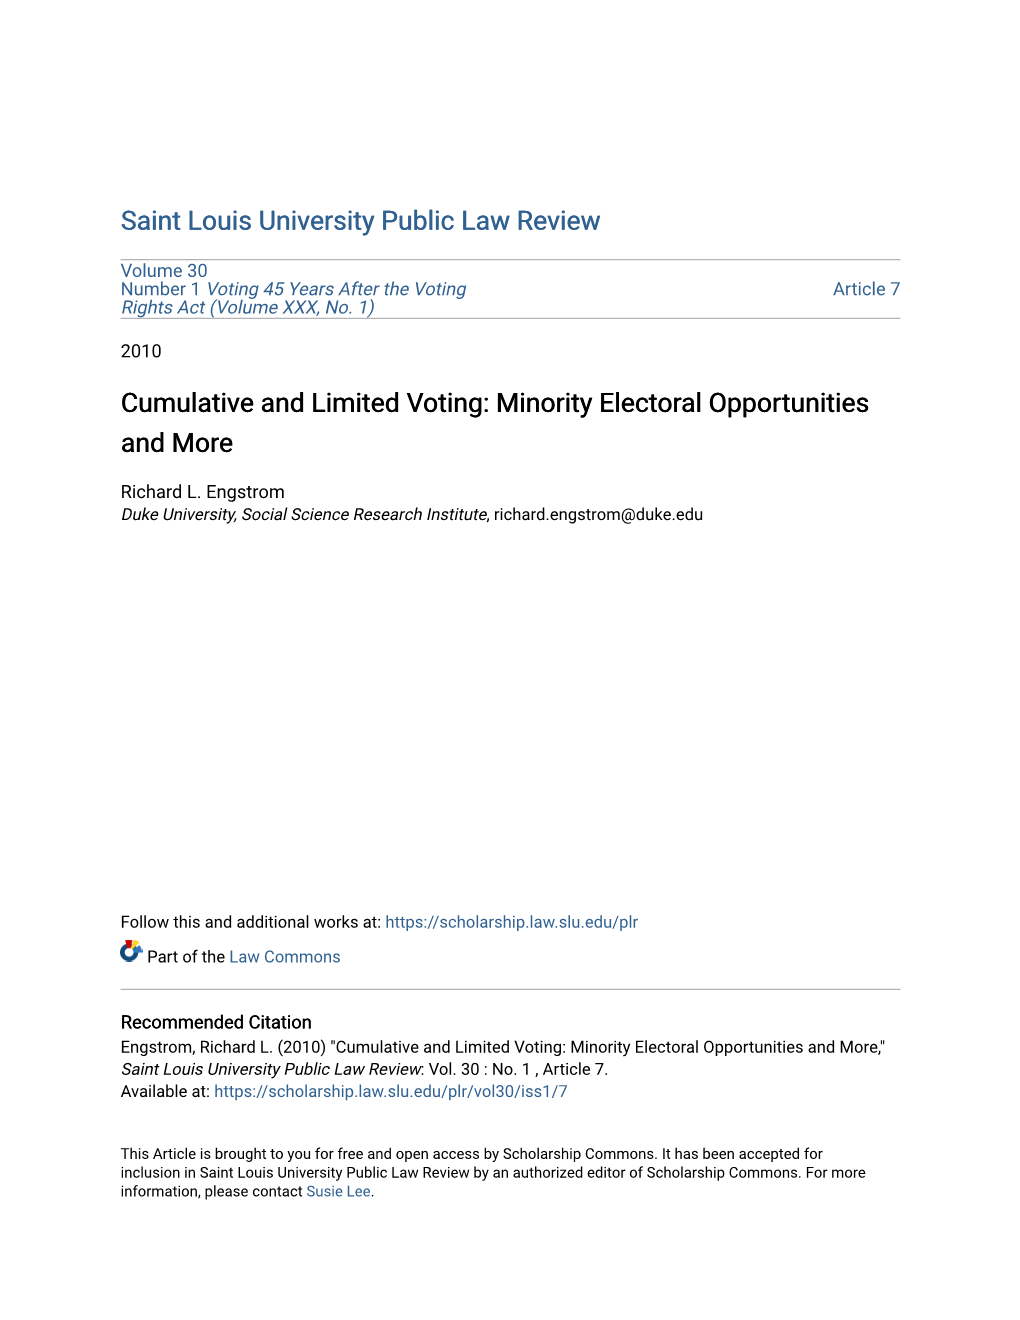 Cumulative and Limited Voting: Minority Electoral Opportunities and More